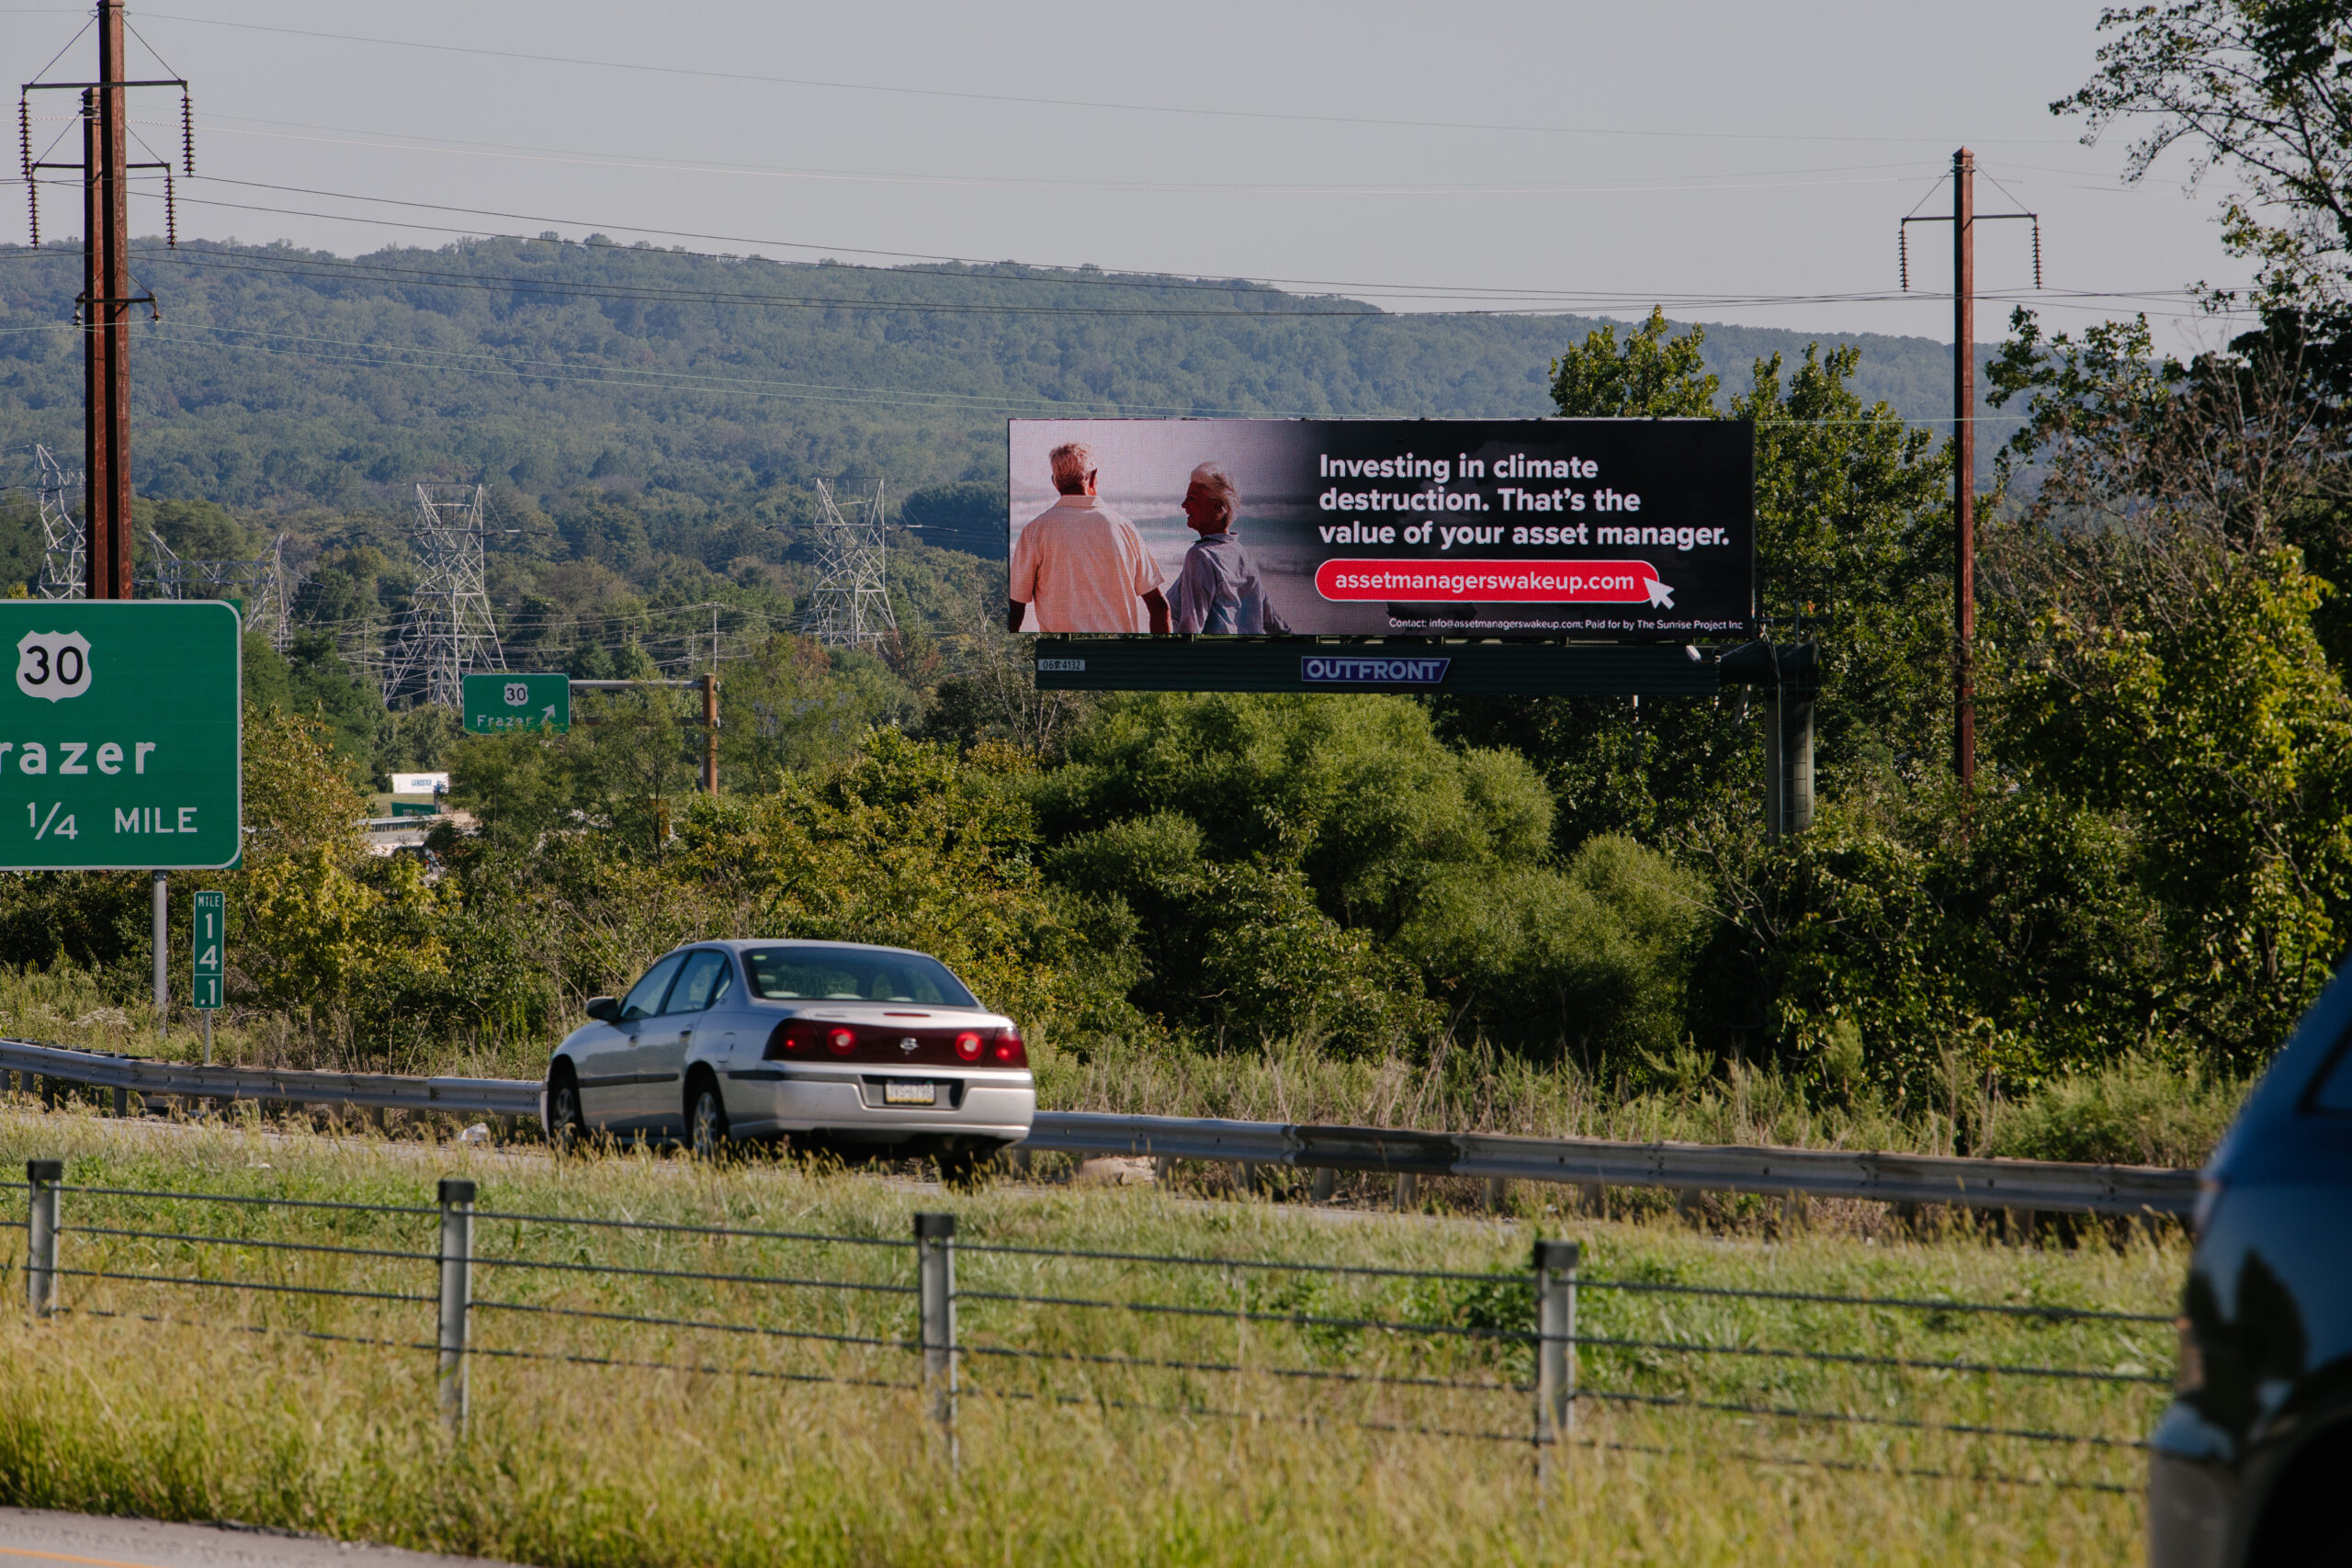 a billboard near Malvern PA is pictured. It says "Investing in climate destruction. That's the value of your asset manager" and is designed to mimic Vanguard ad campaigns.